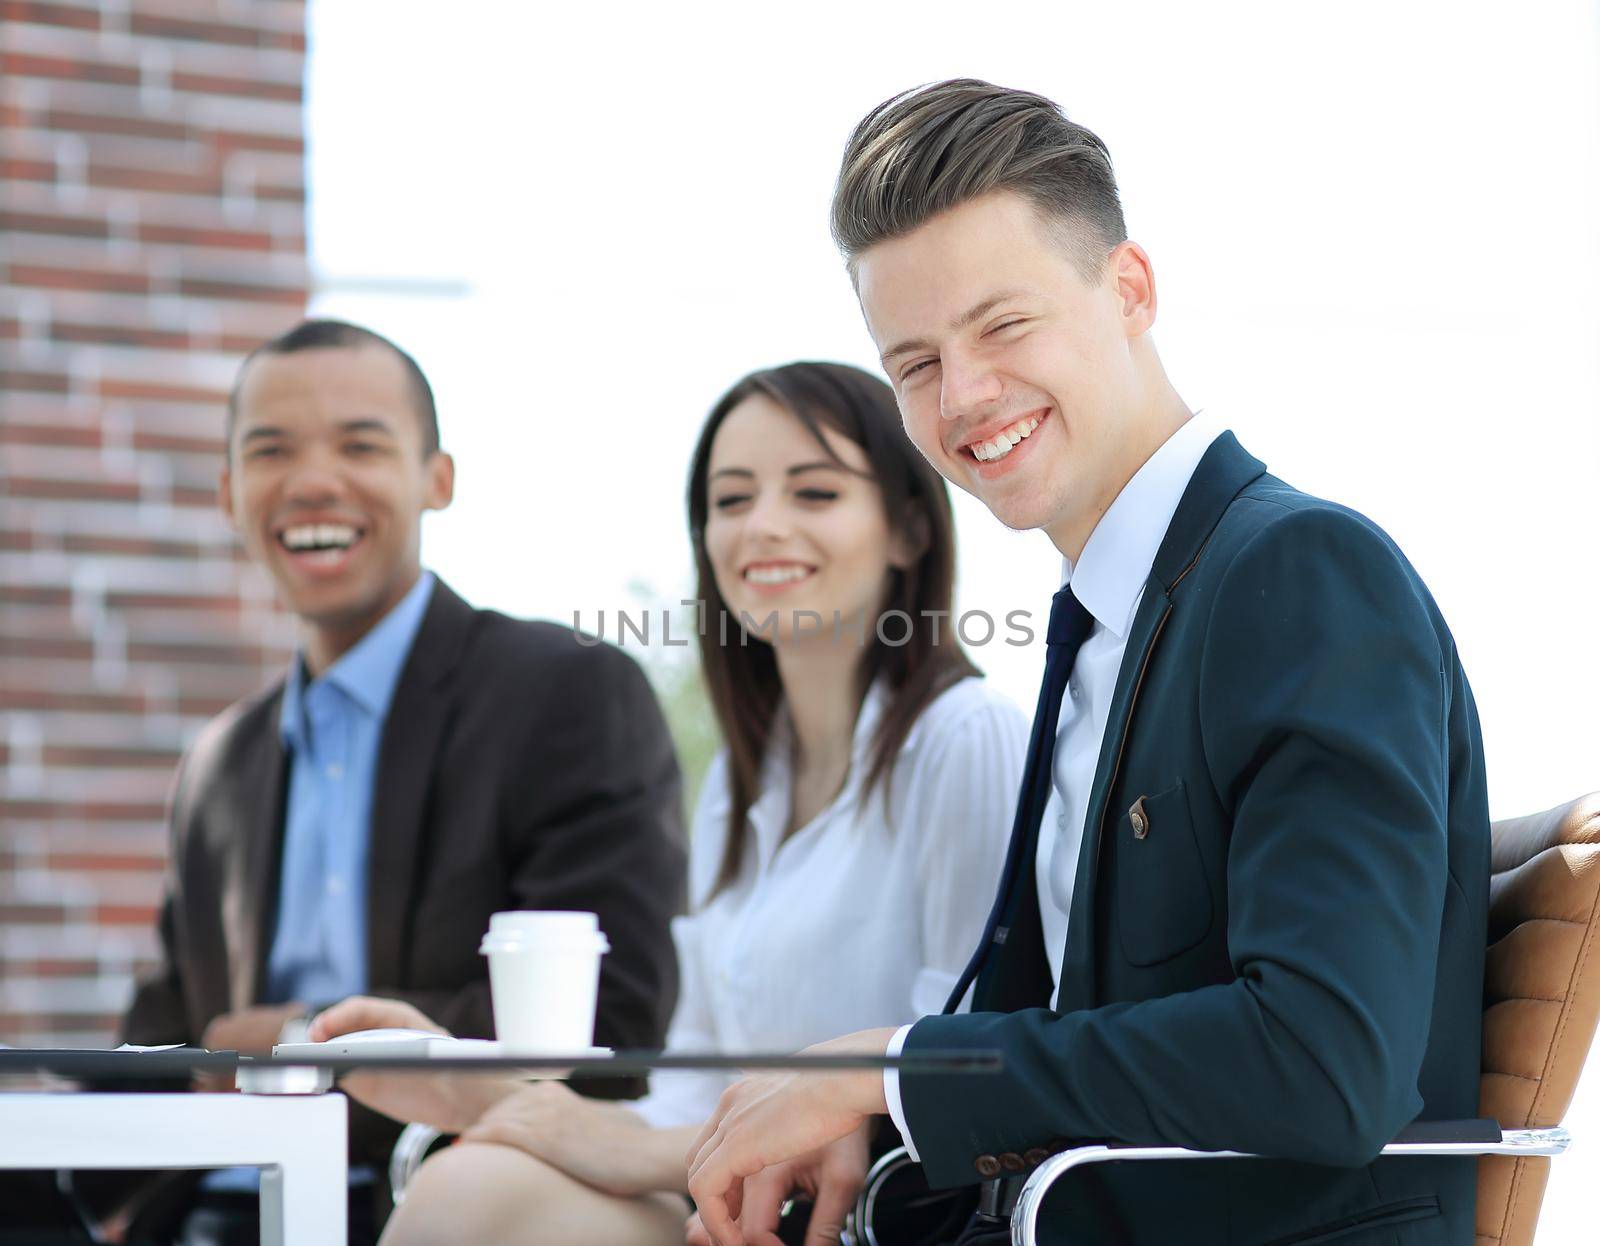 portrait of a professional business team sitting at Desk by SmartPhotoLab